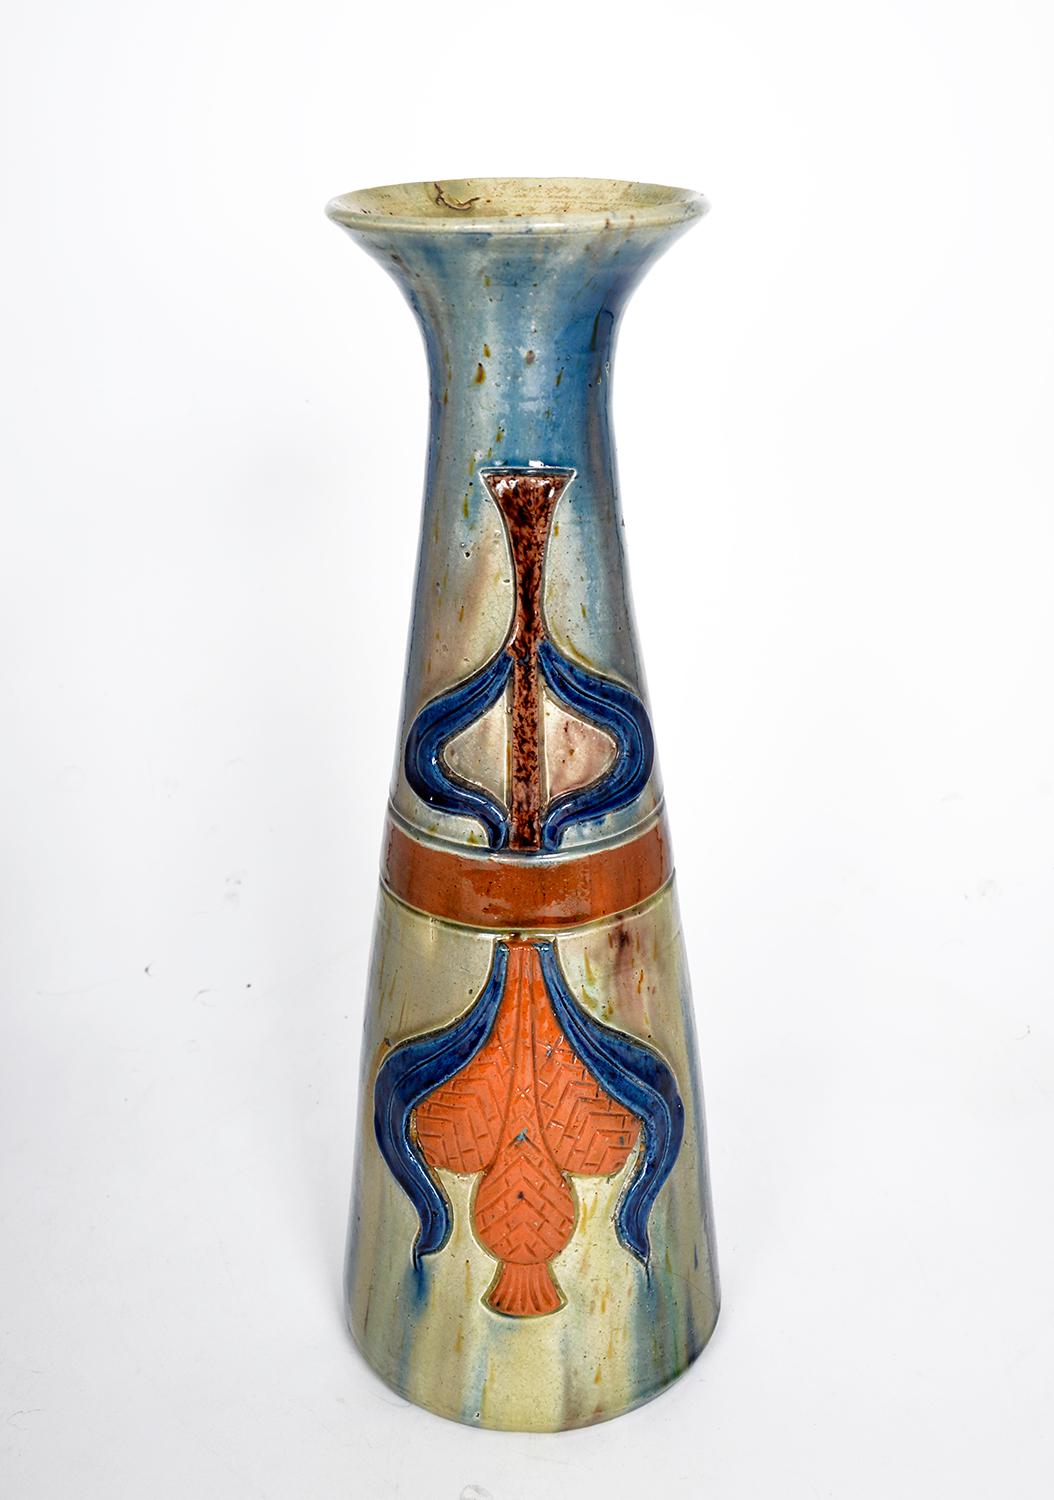 This tall and very stylish conical Art Nouveau vase is a beautiful example of Flemish pottery or ‘Poterie Flamande’ from Torhout dating from the 1900s. The vase is a rainbow of colours created by a drip glaze of brown, blue, yellow and orange. It